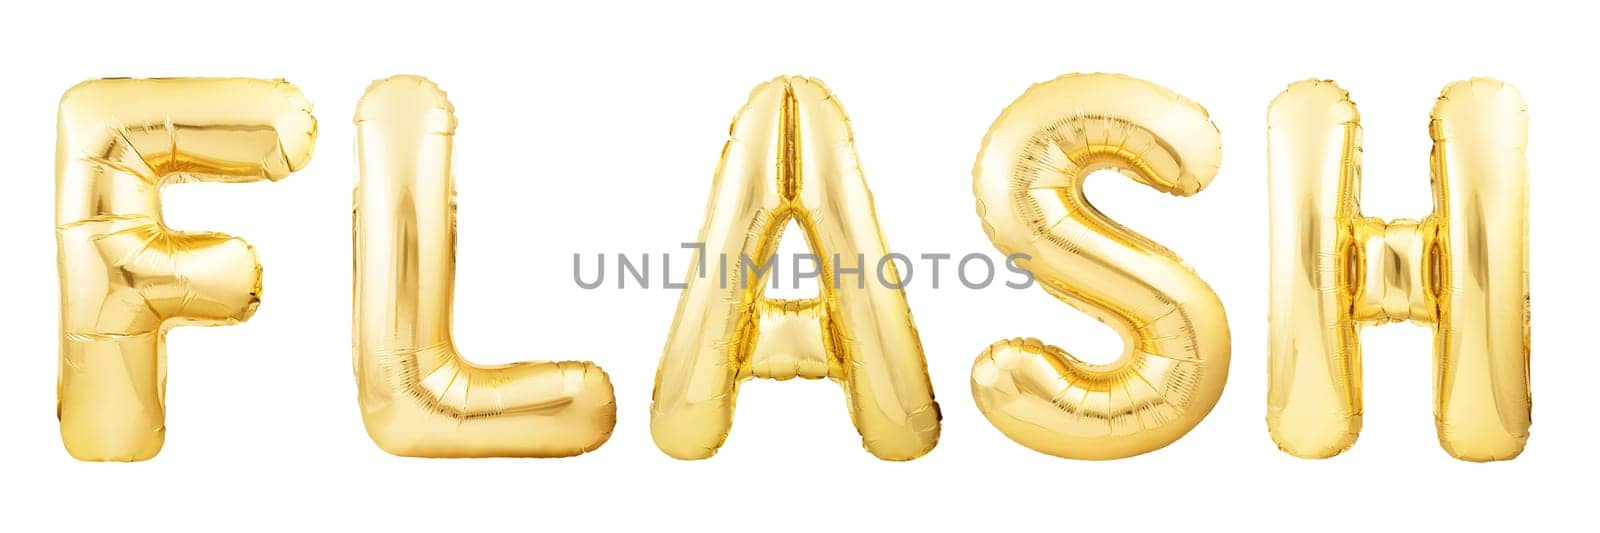 Word flash made of golden inflatable balloons isolated on white background by dmitryz